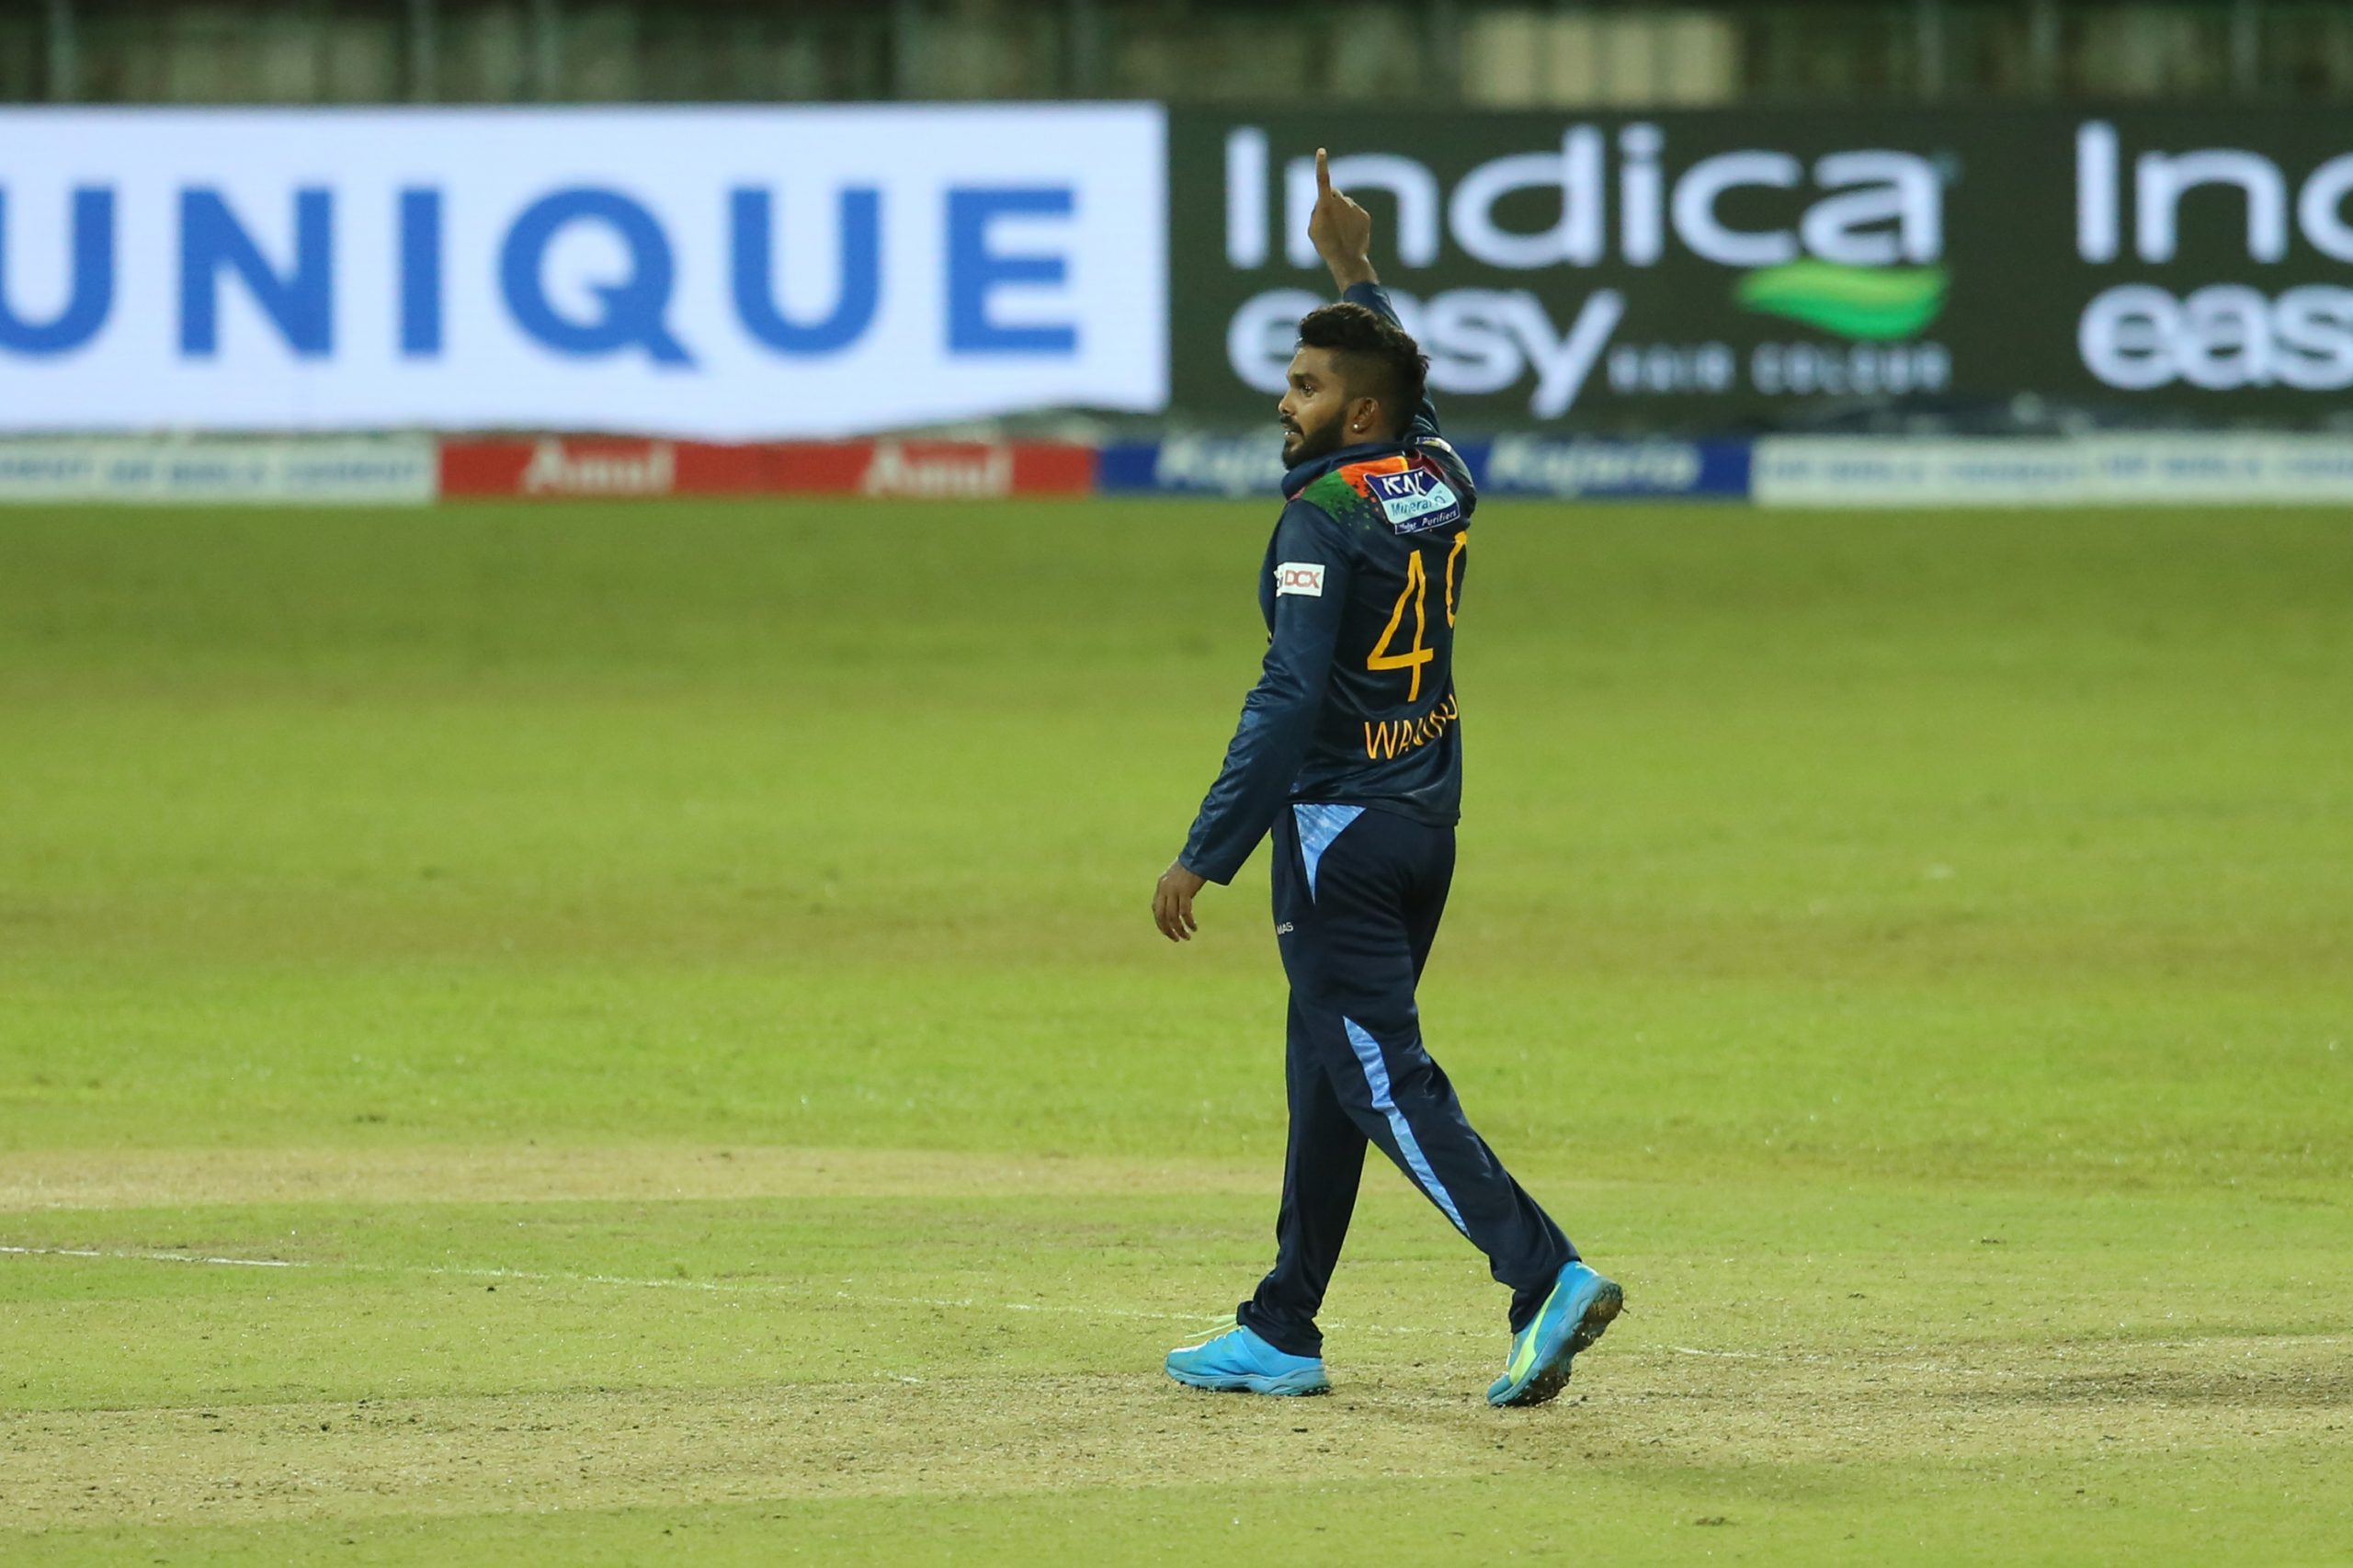 Wanindu Hasaranga attains career-best second place in ICC Men’s T20I Player Rankings